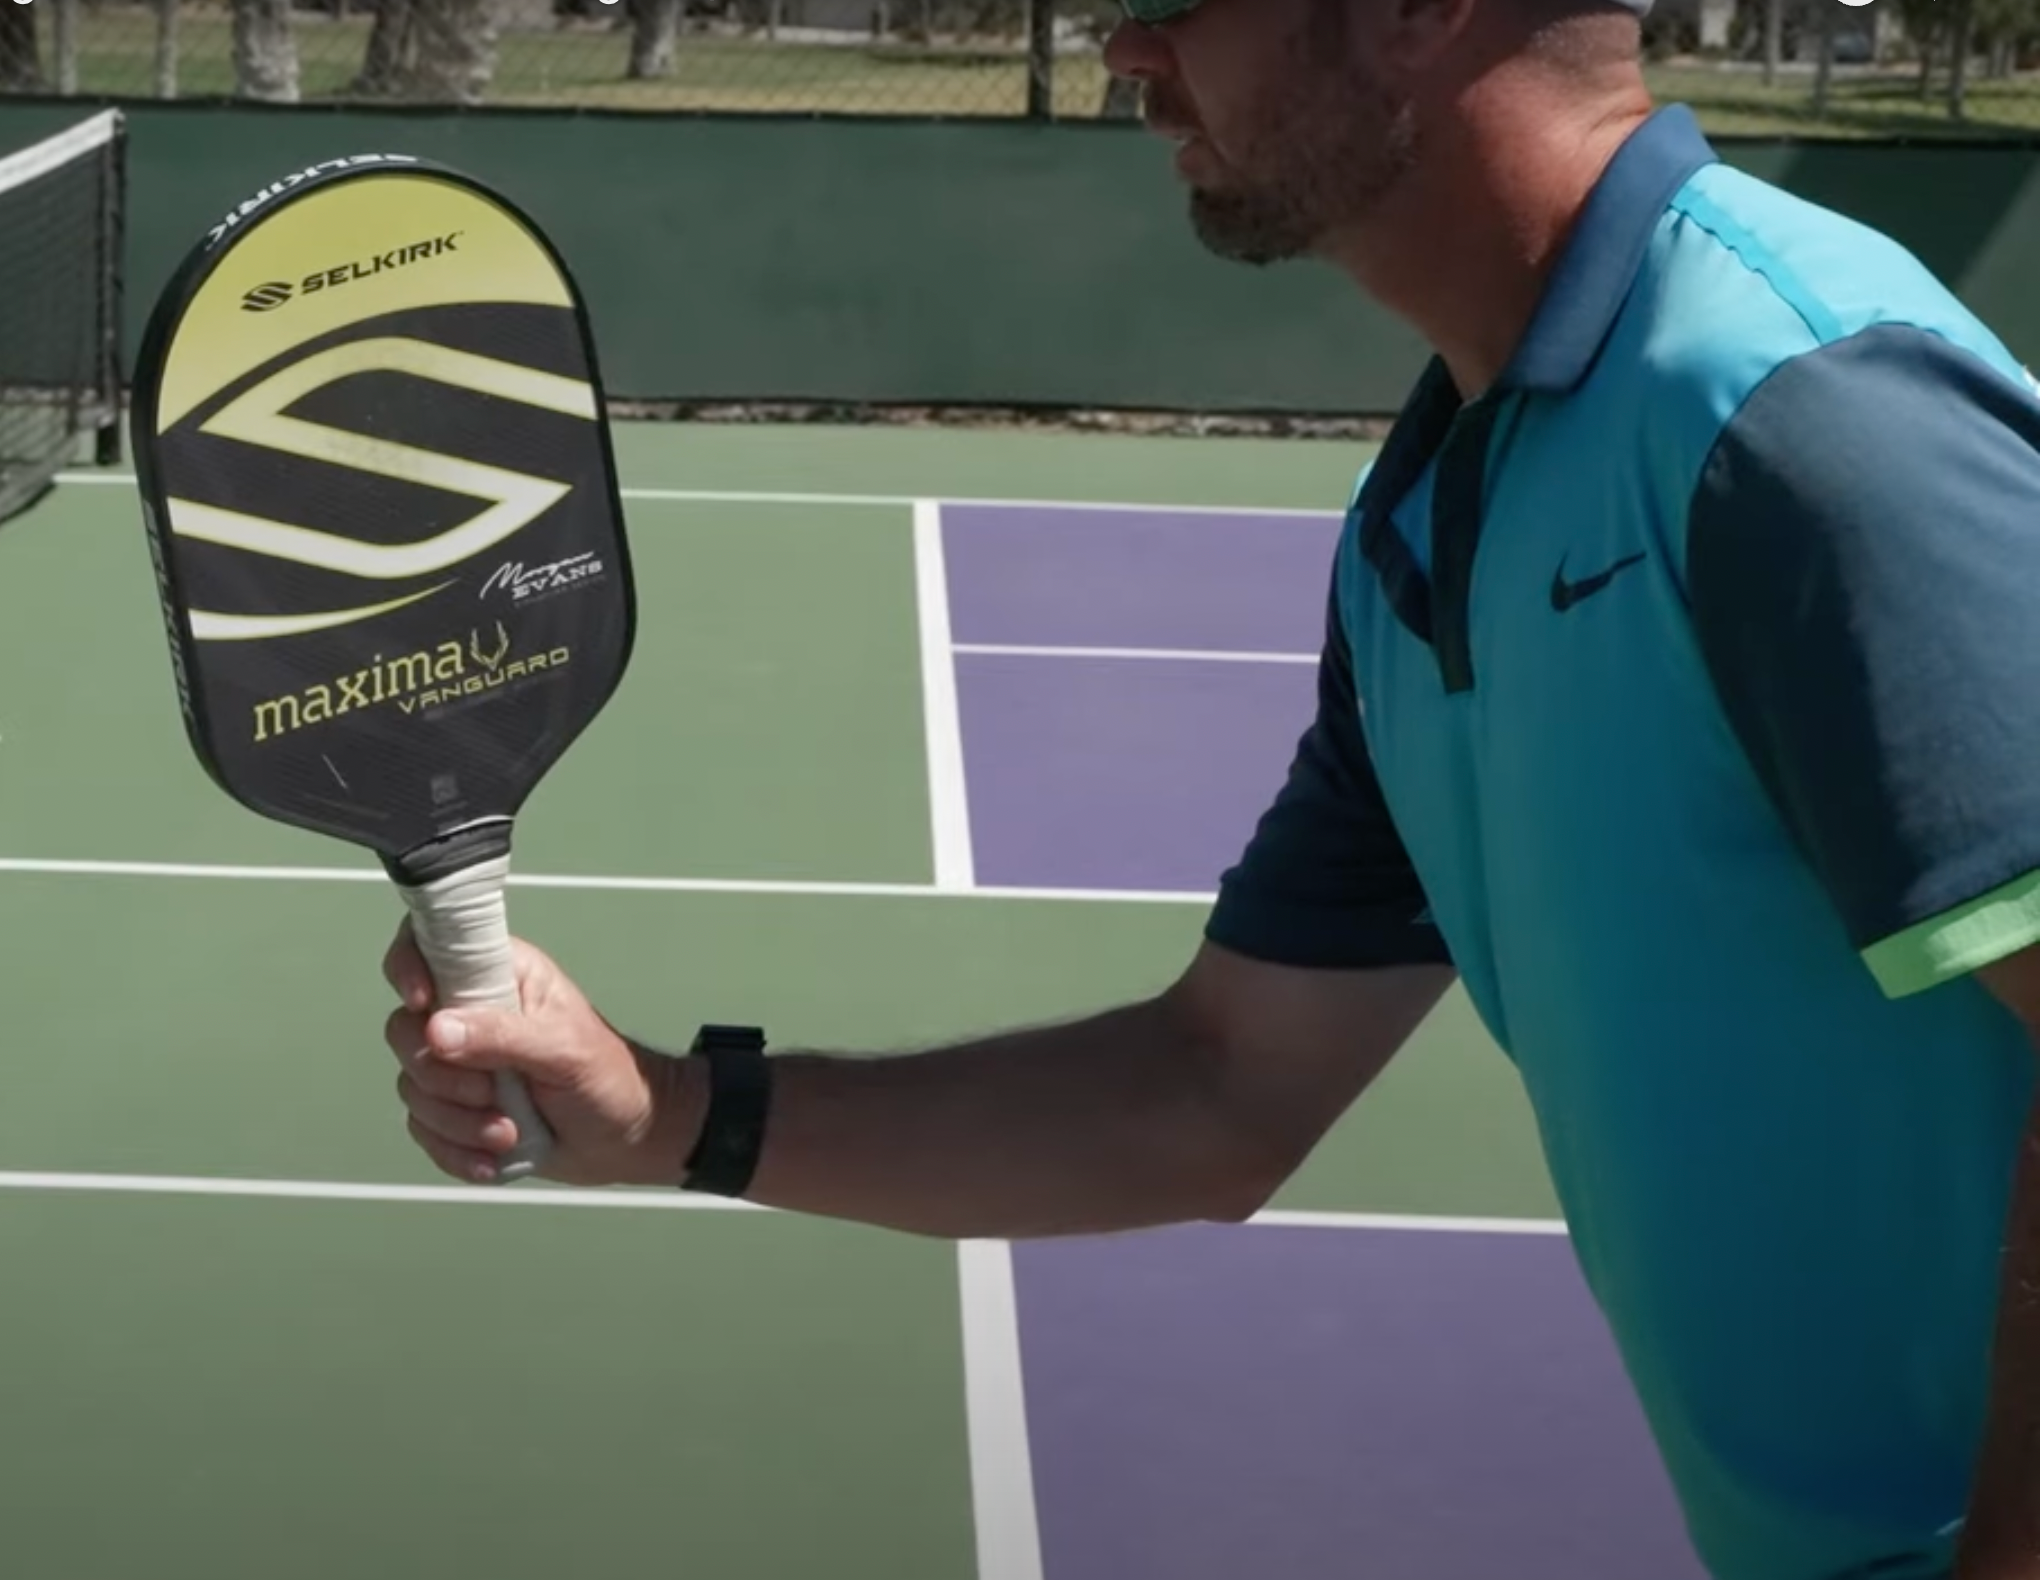 How to hold your paddle depends on where you're positioned on the pickleball court